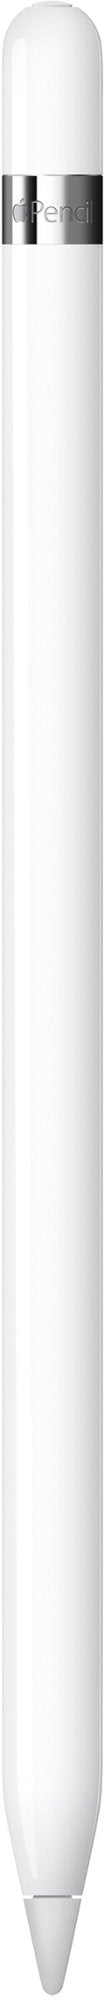 Apple Pencil (1st Generation) with USB-C to Pencil Adapter - White (New)